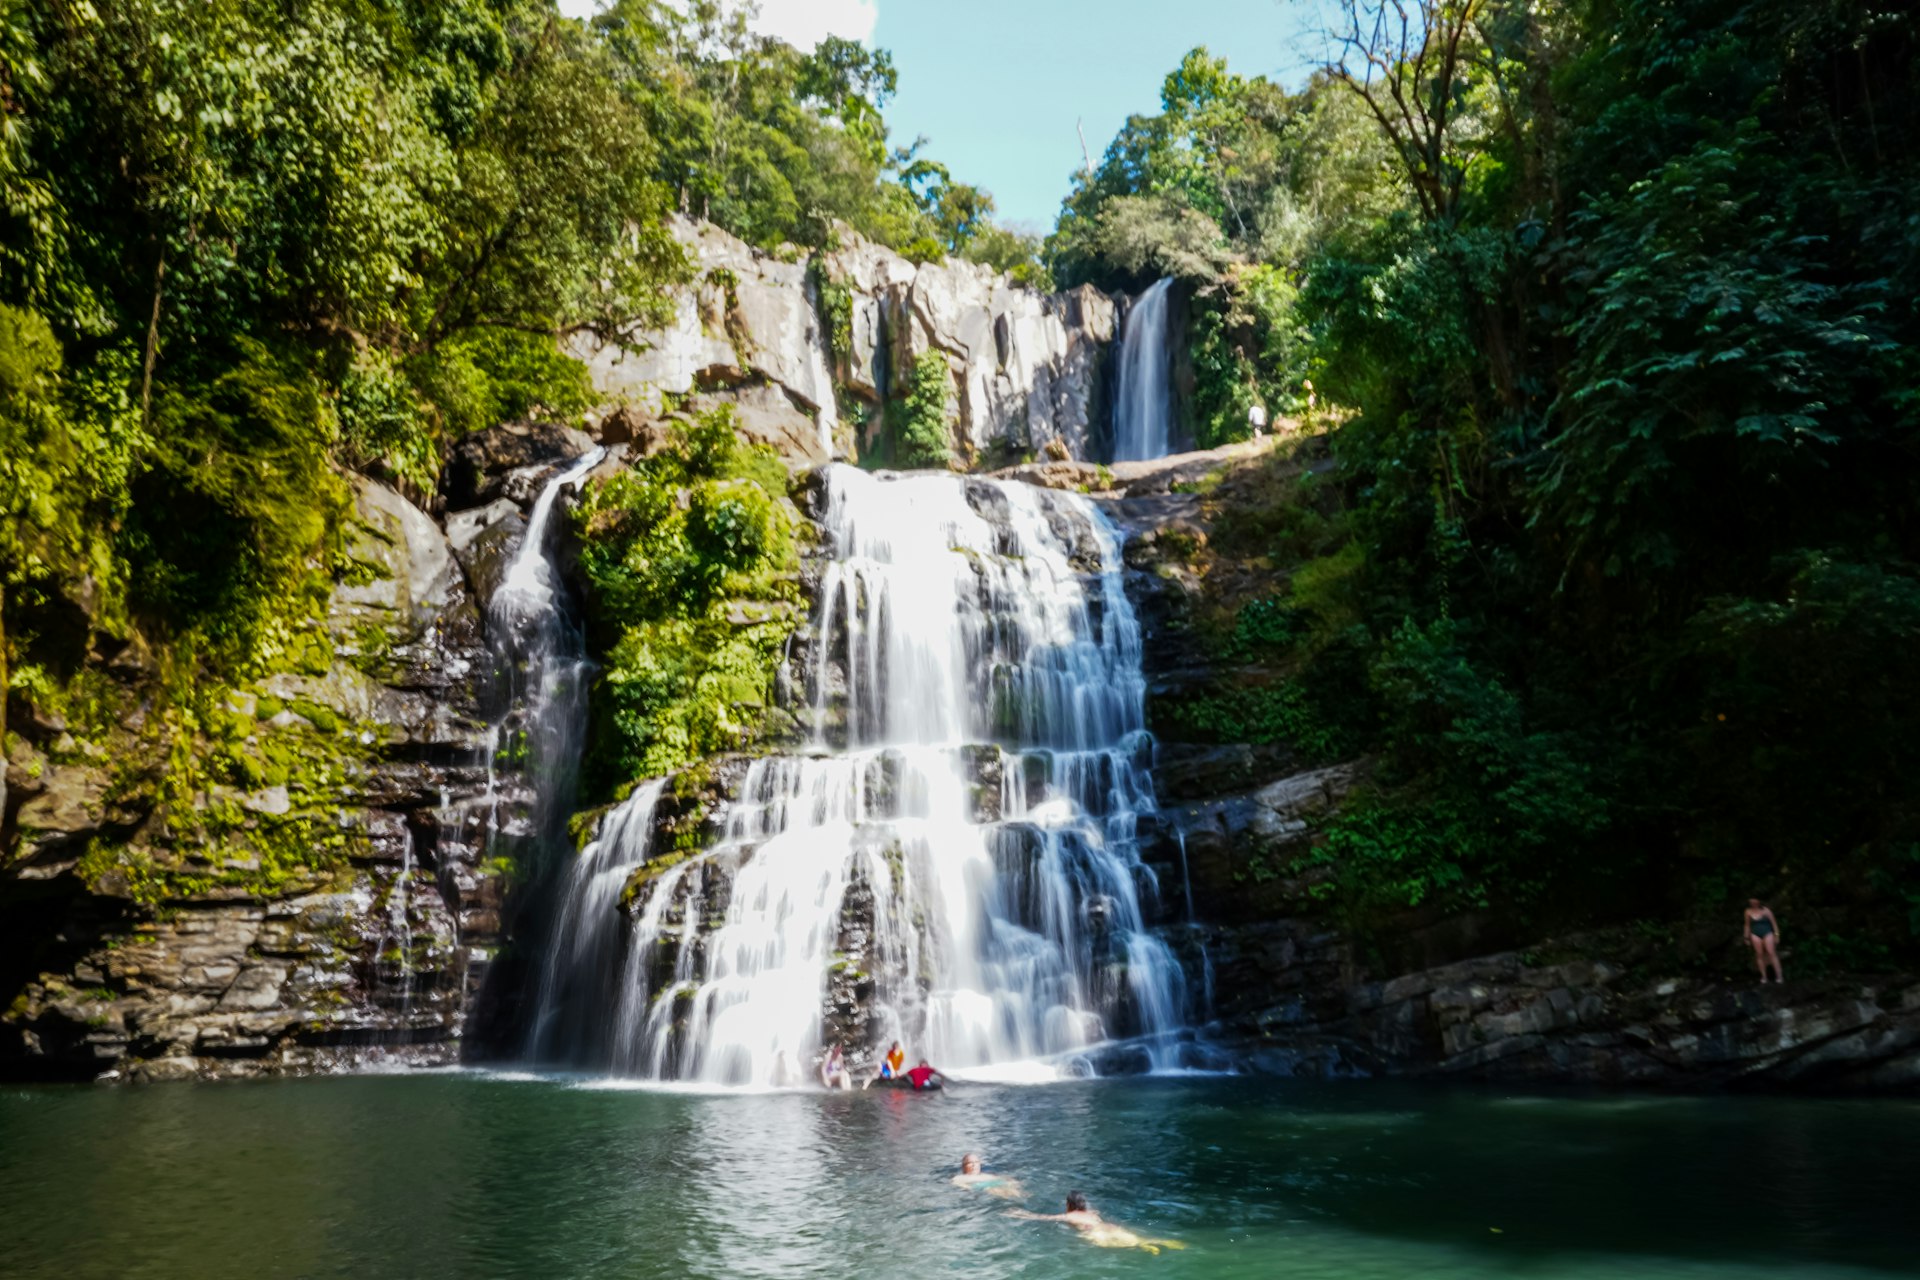 People swim and play in the water at the base of a tiered waterfall in a jungle setting